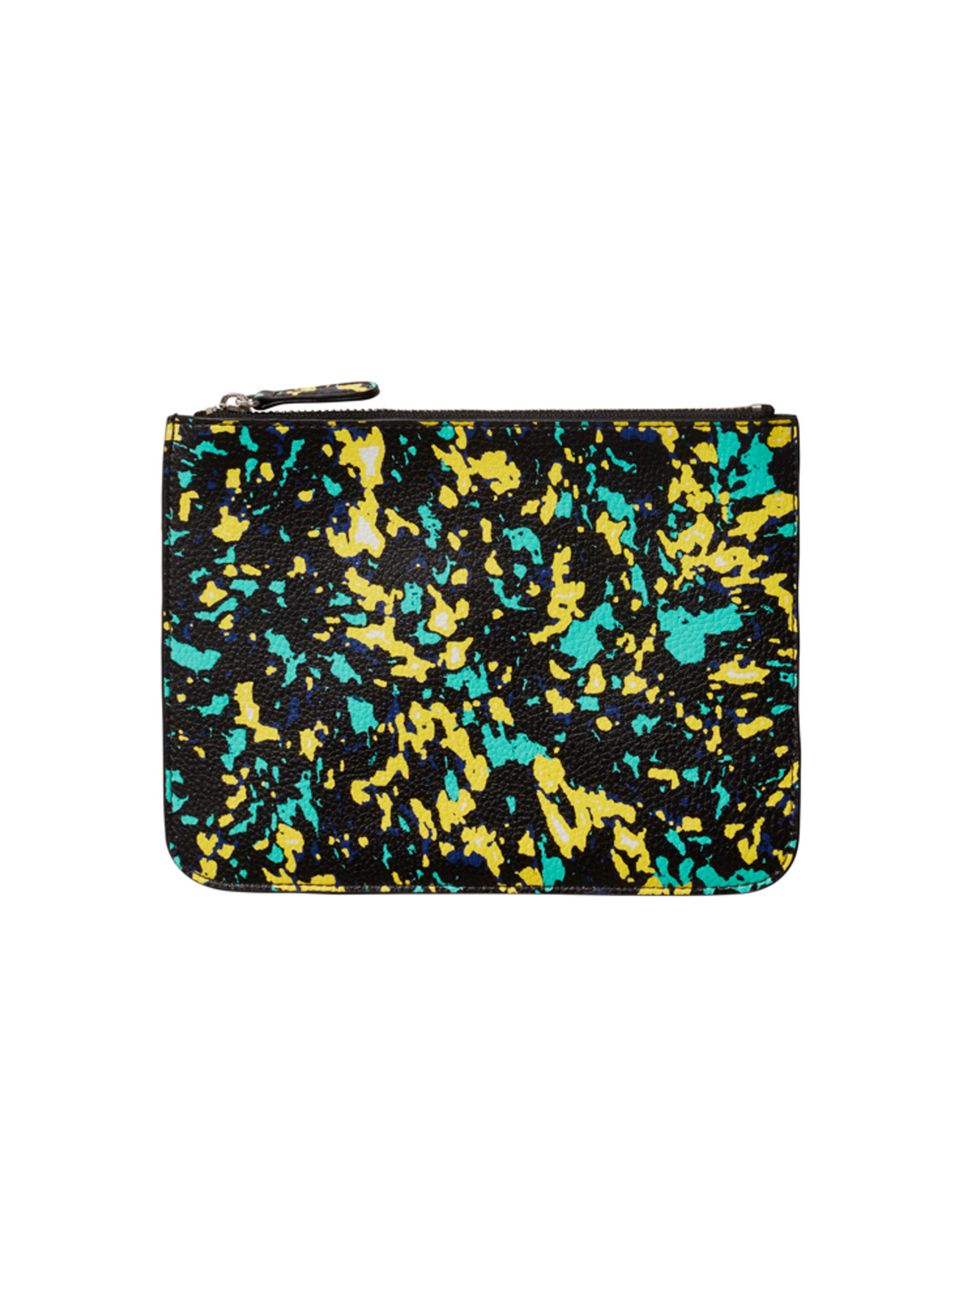 <p>For all your slippery handbag essentails (yes that's you oyster card/keys/lipbalm).<br />
 </p>

<p><a href="http://www.monki.com/View_all_new/Cajsa_case/8668818-9728059.1#c-126153" target="_blank">Pouch</a>, £6, from Monki</p>